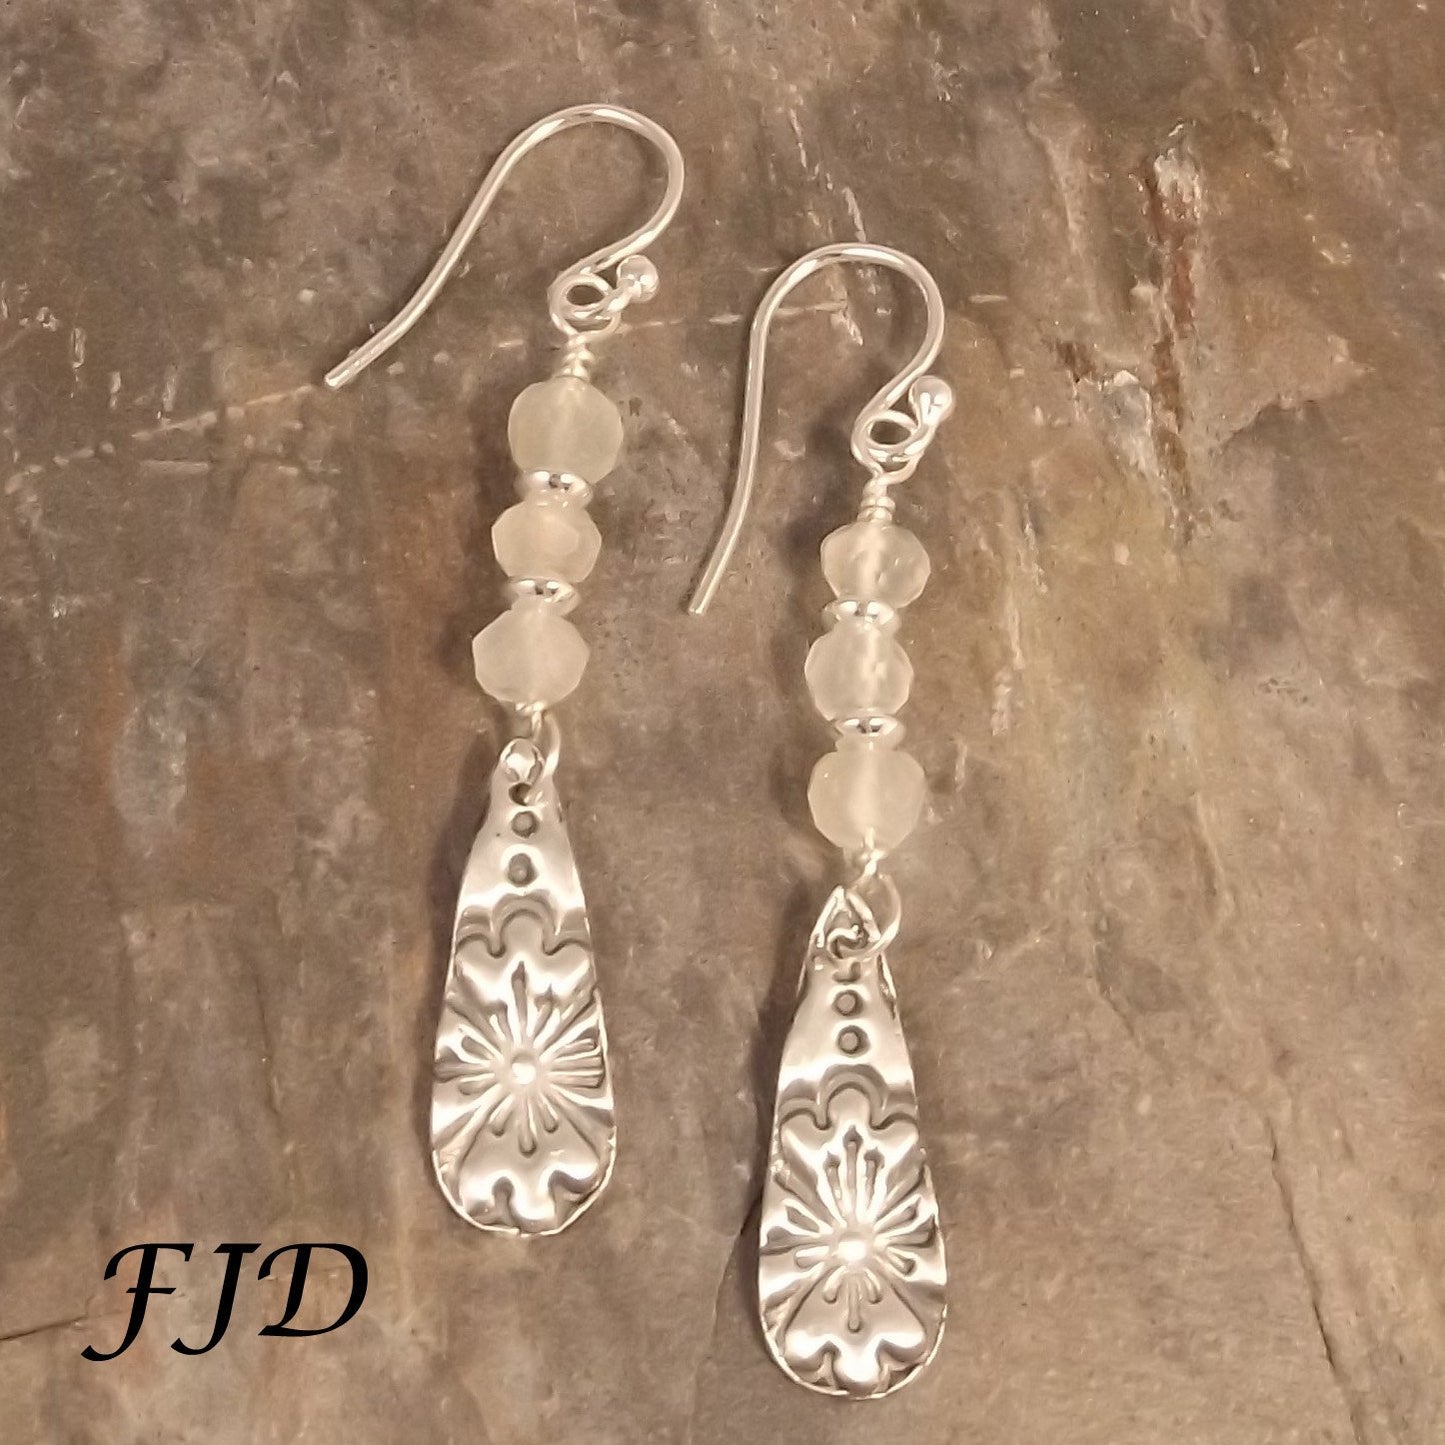 Silver and Moonstone Earrings